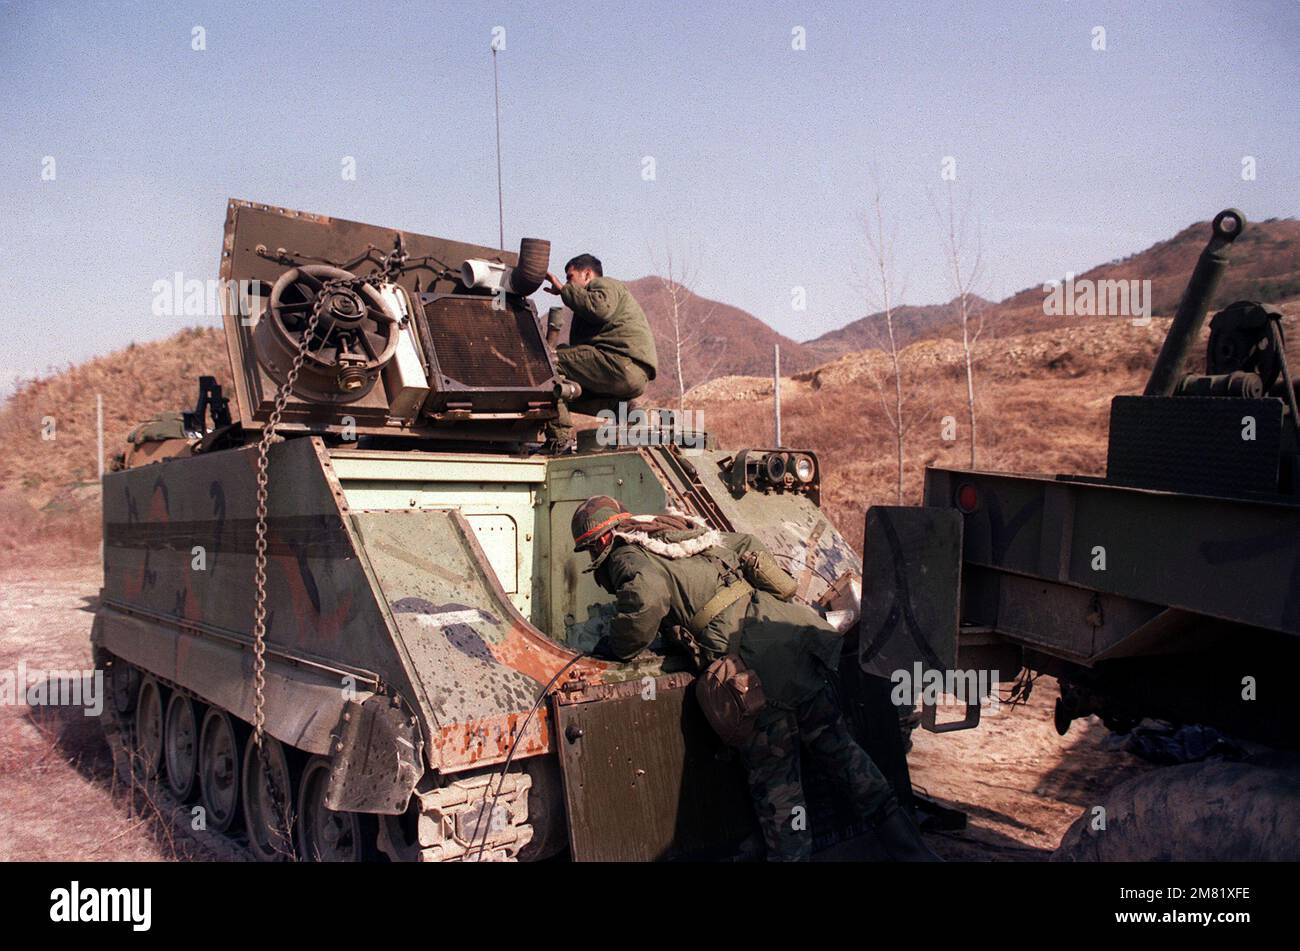 Members of the 2nd Forward Support Bn., 25th,. Inf. Div., perform maintenance on an M-113A2 armored personnel carrier during the joint South Korean/U.S. training exercise Team Spirit '84. Subject Operation/Series: TEAM SPIRIT '84 Base: Hongchon Country: Republic Of Korea (KOR) Stock Photo